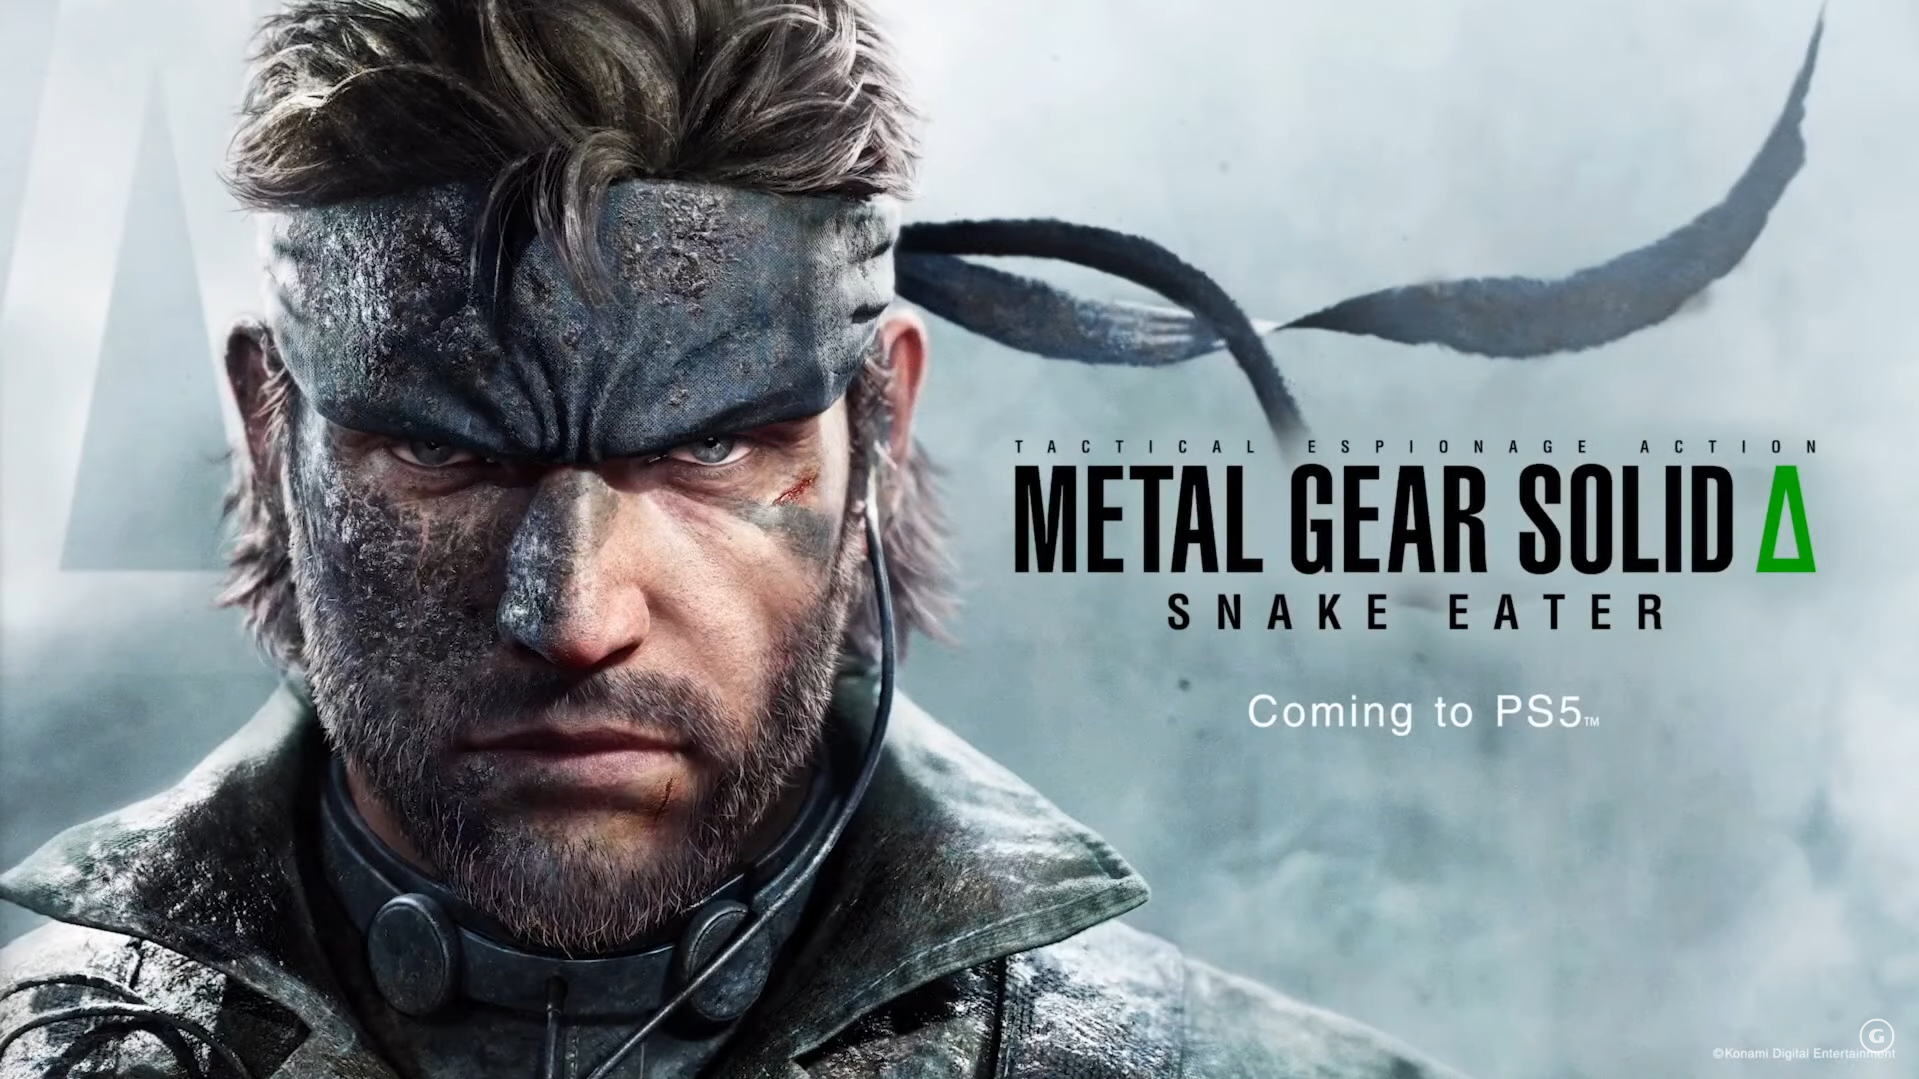 mgs3 remake reveal trailer